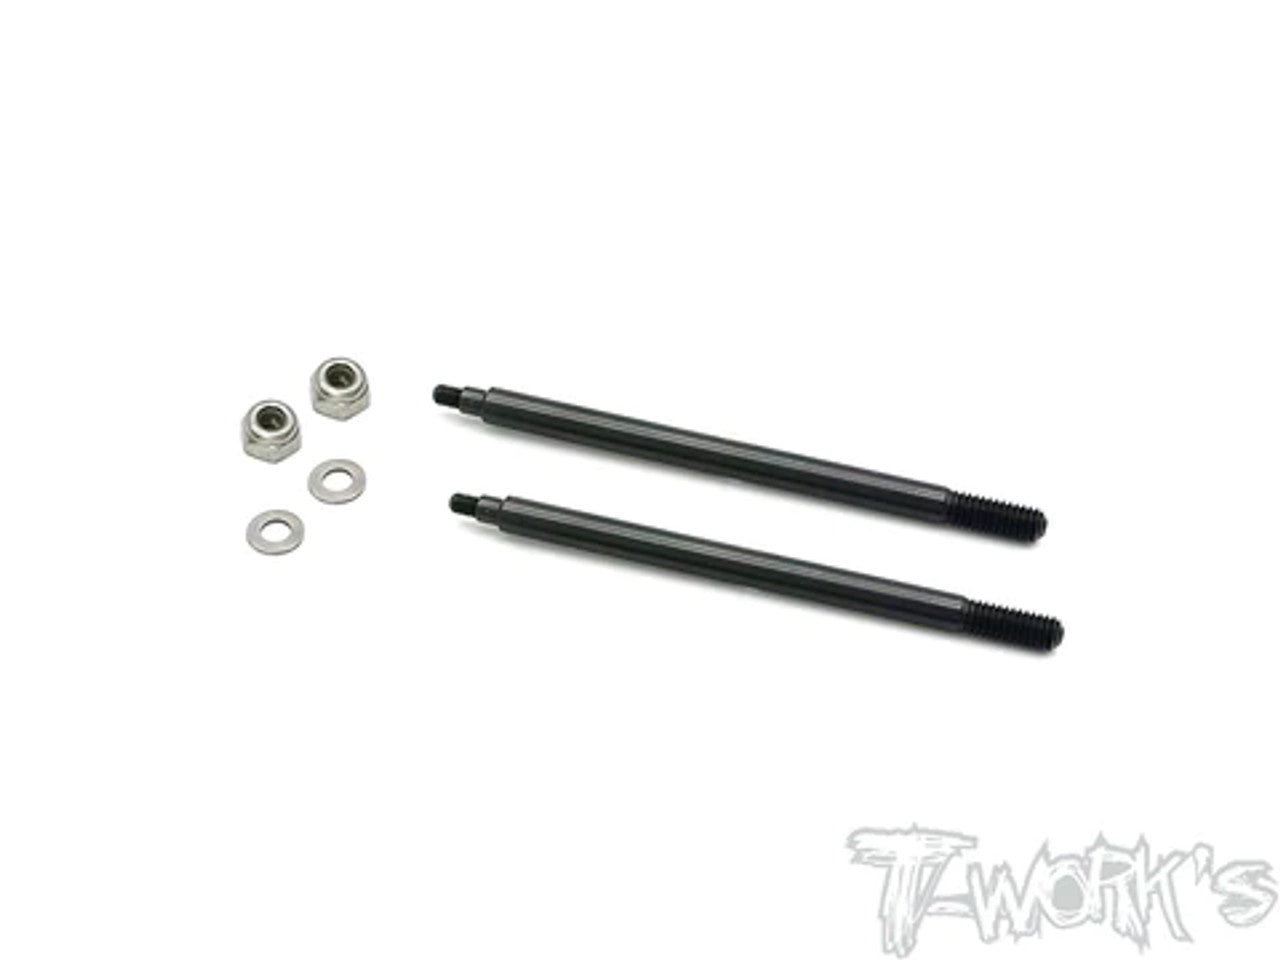 DLC coated Rear Shock Shaft 65.9mm. ( For AGAMA A319 )